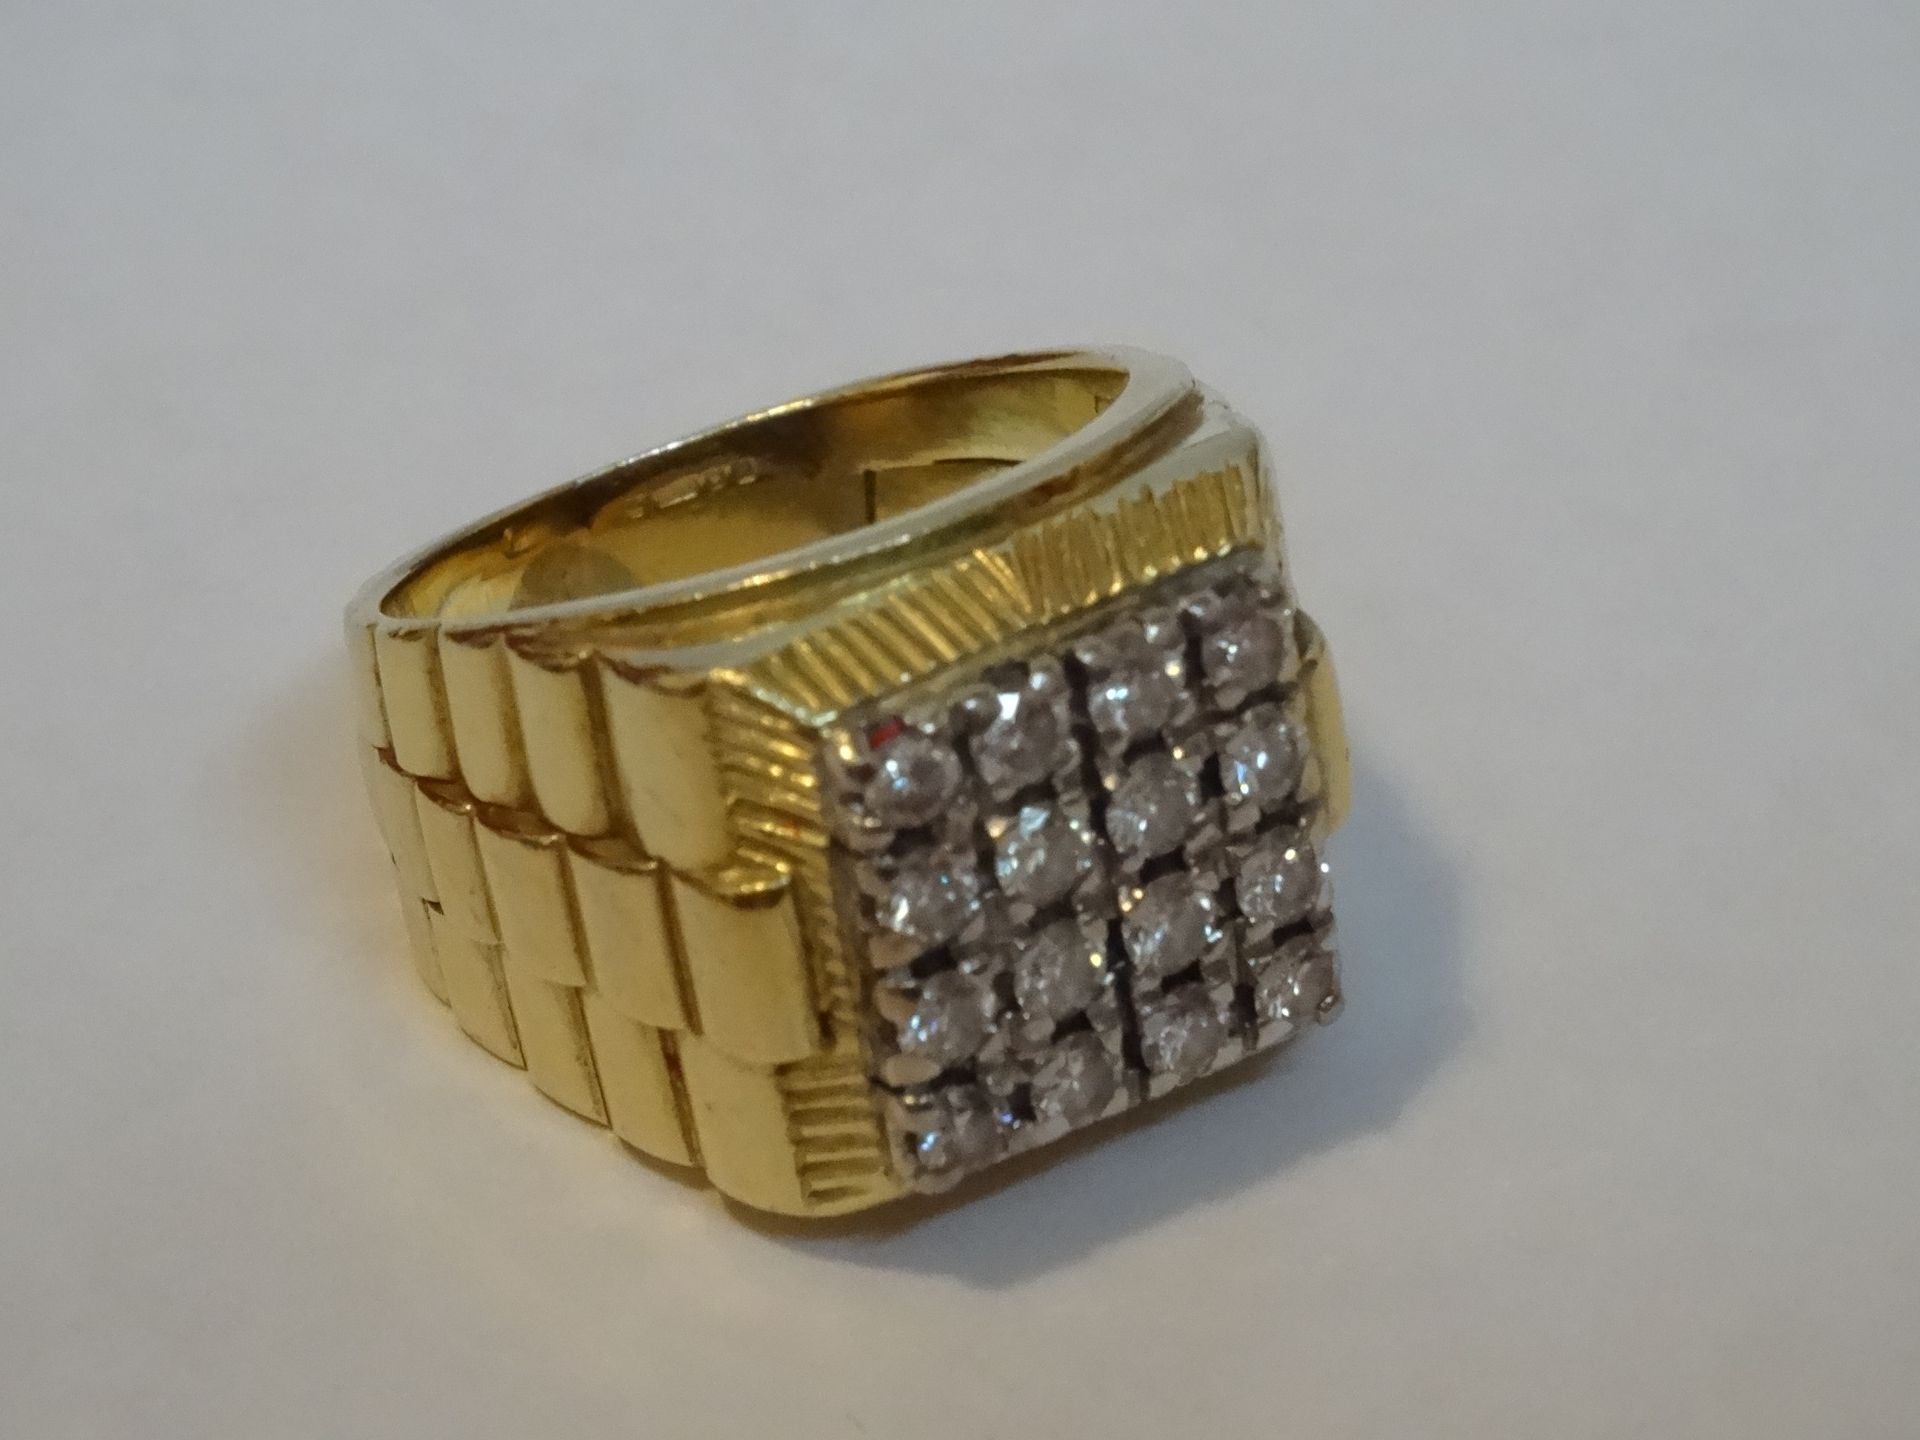 18 Carat Yellow & White Gold Gents Rolex Style Ring Containing 0.8 Carats Of Diamonds.